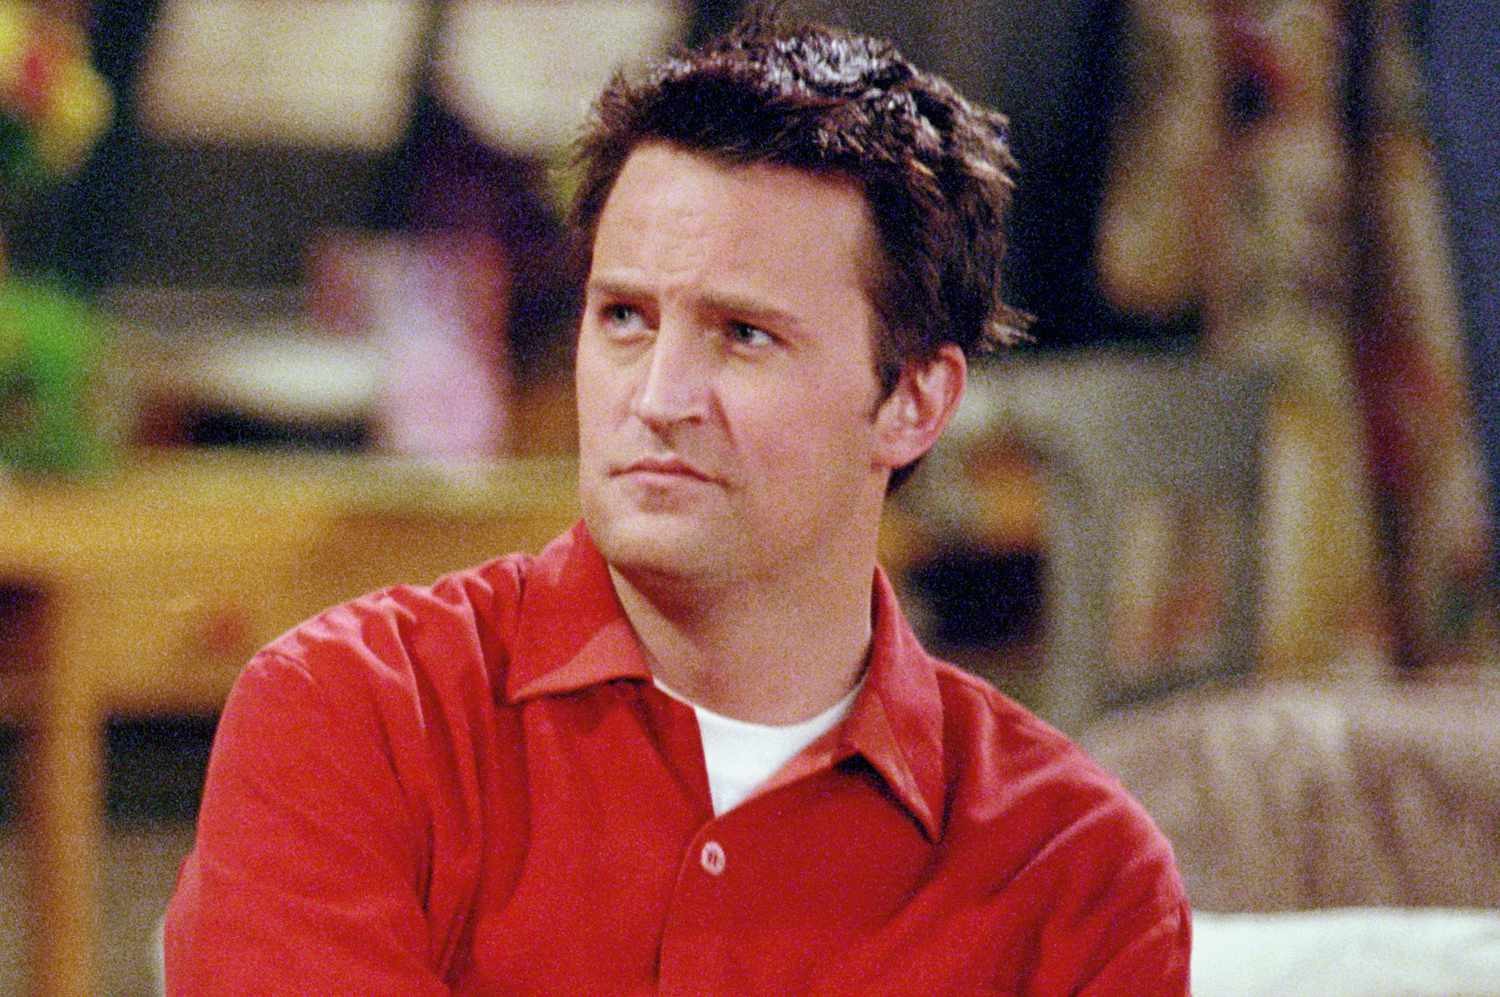 Matthew Perry's death came as a shock to his fans and even to his FRIENDS co-stars